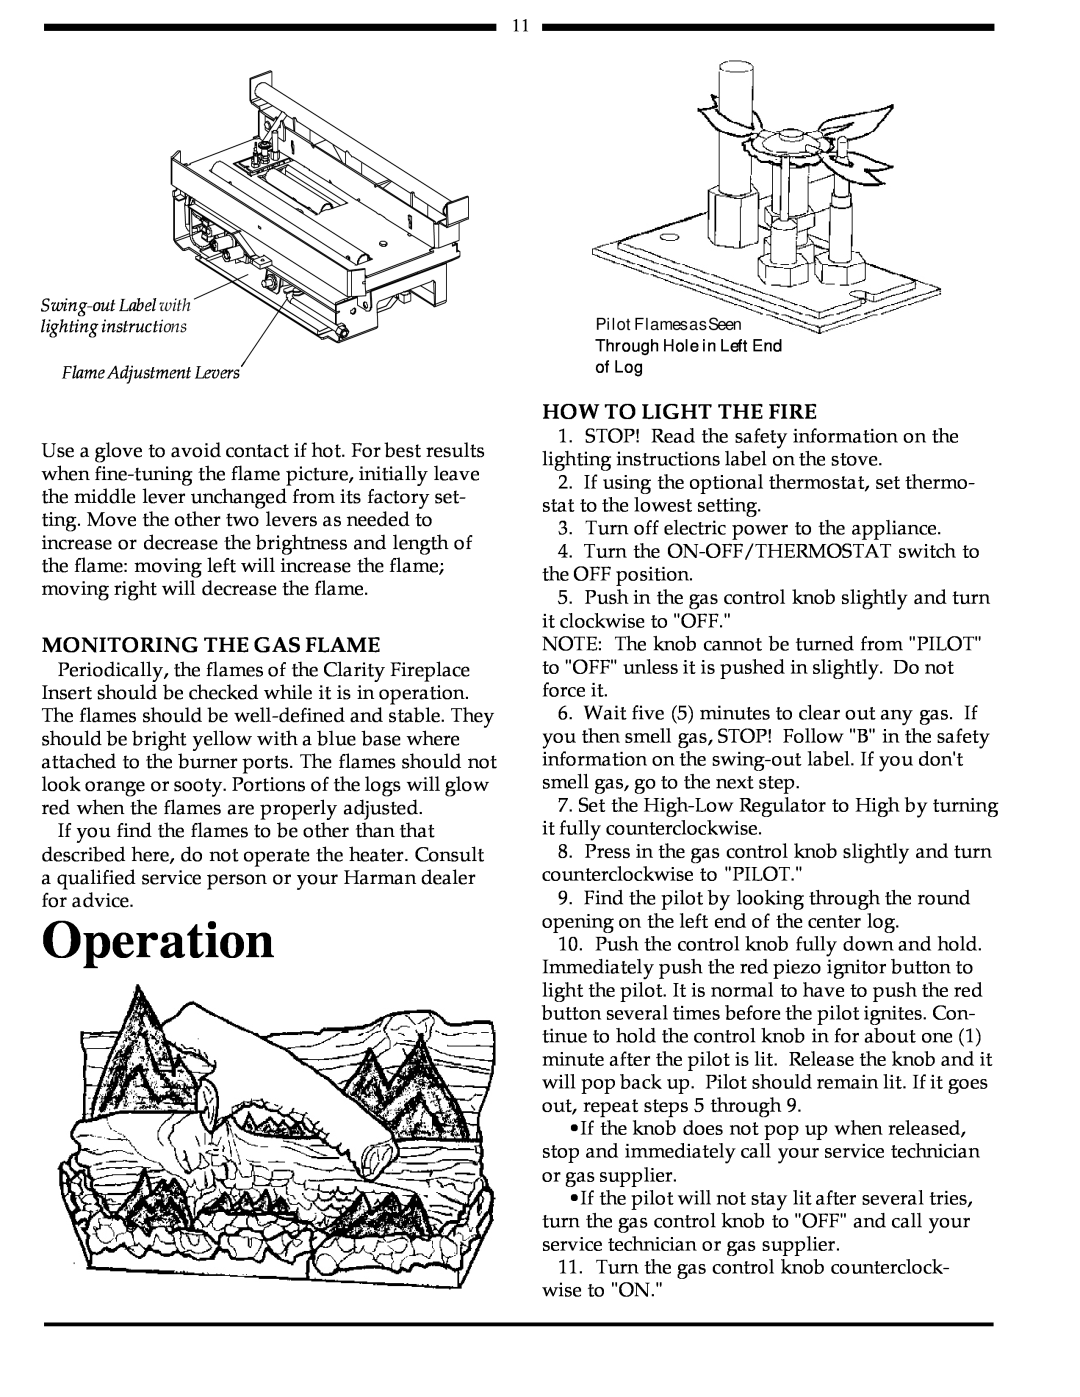 Harman Stove Company 828i manual Operation, Monitoring The Gas Flame, How To Light The Fire 